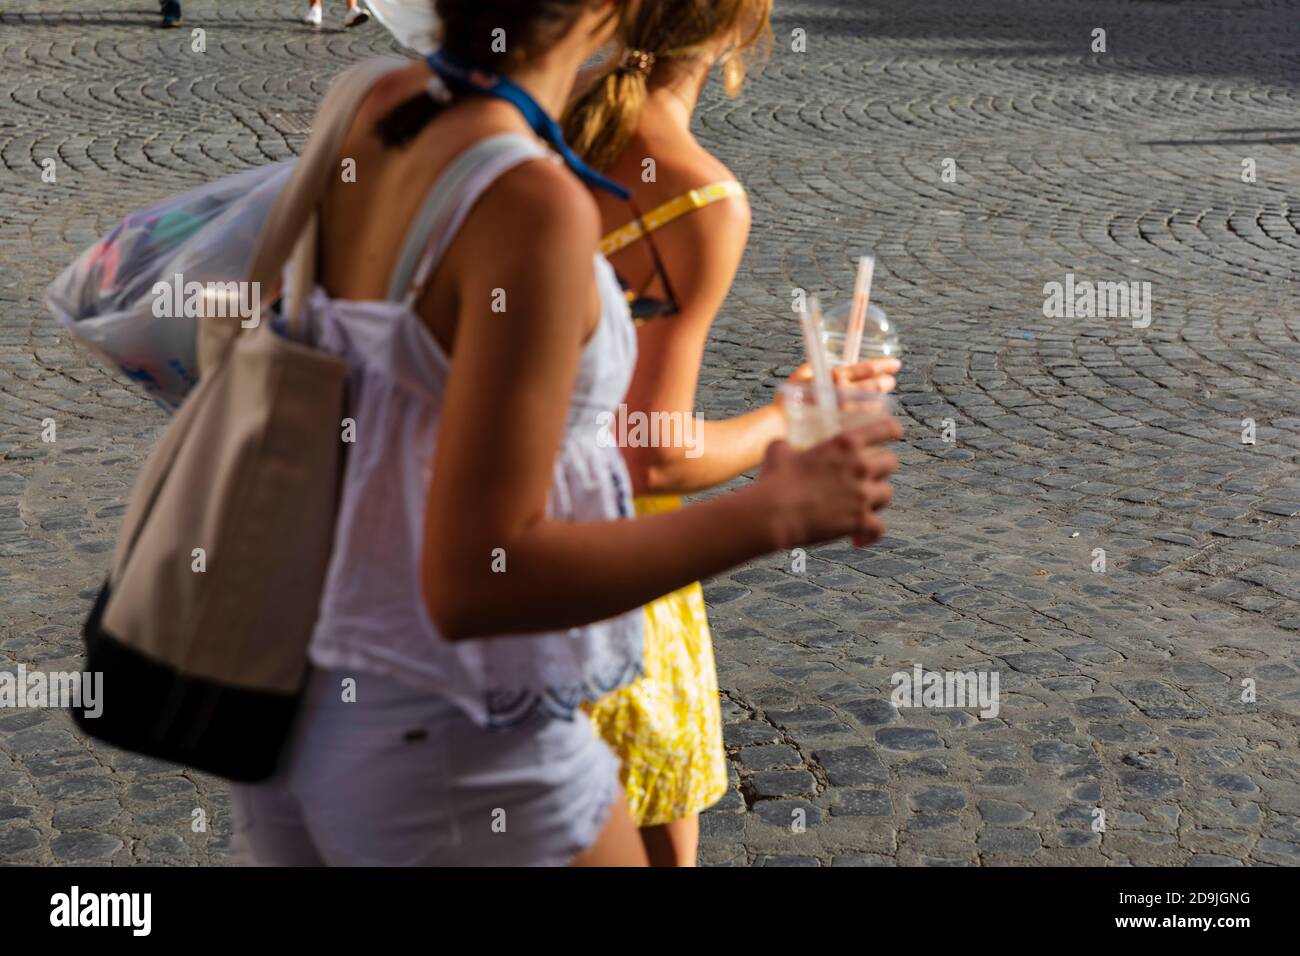 Two teenage girls carrying plastic cups with straws in Piazza Santa Maria, Trastevere, Rome, Italy. Stock Photo